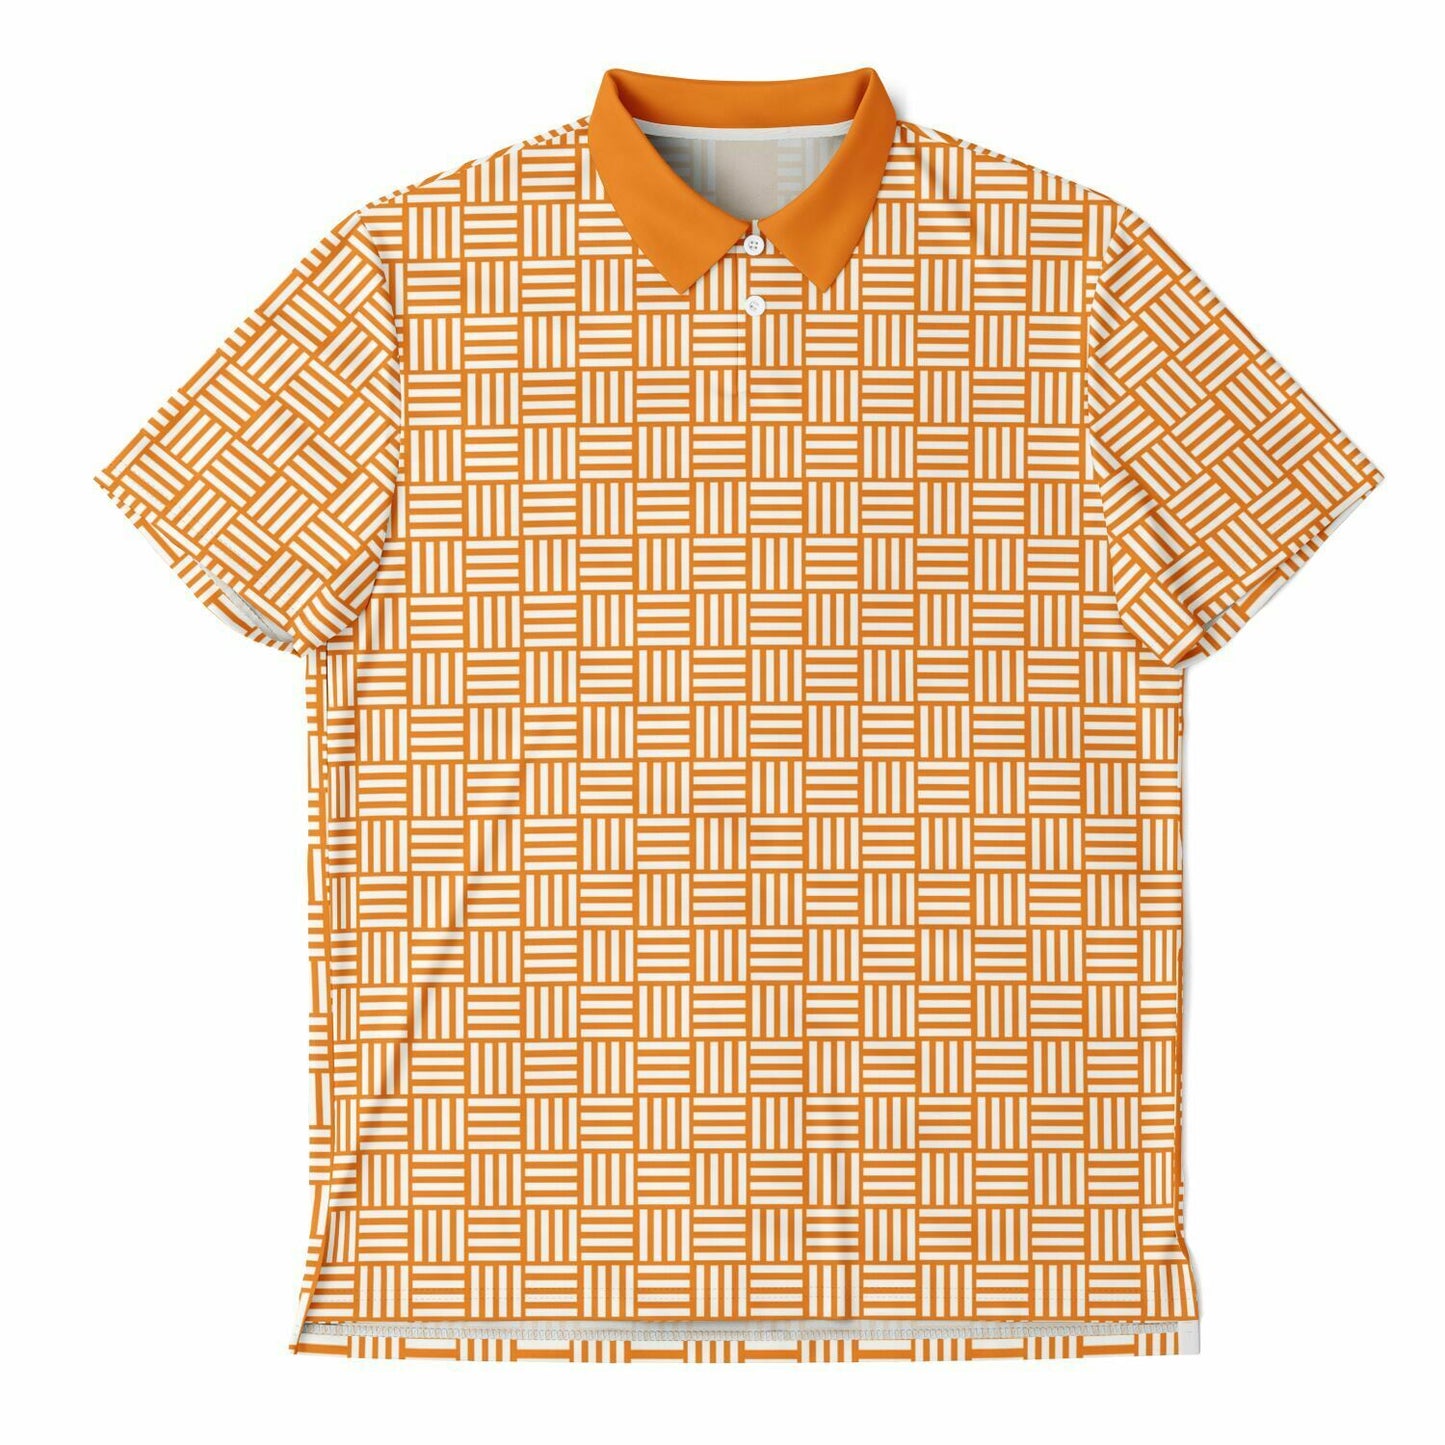 Knoxville, Tennessee Stripe Golf Polo